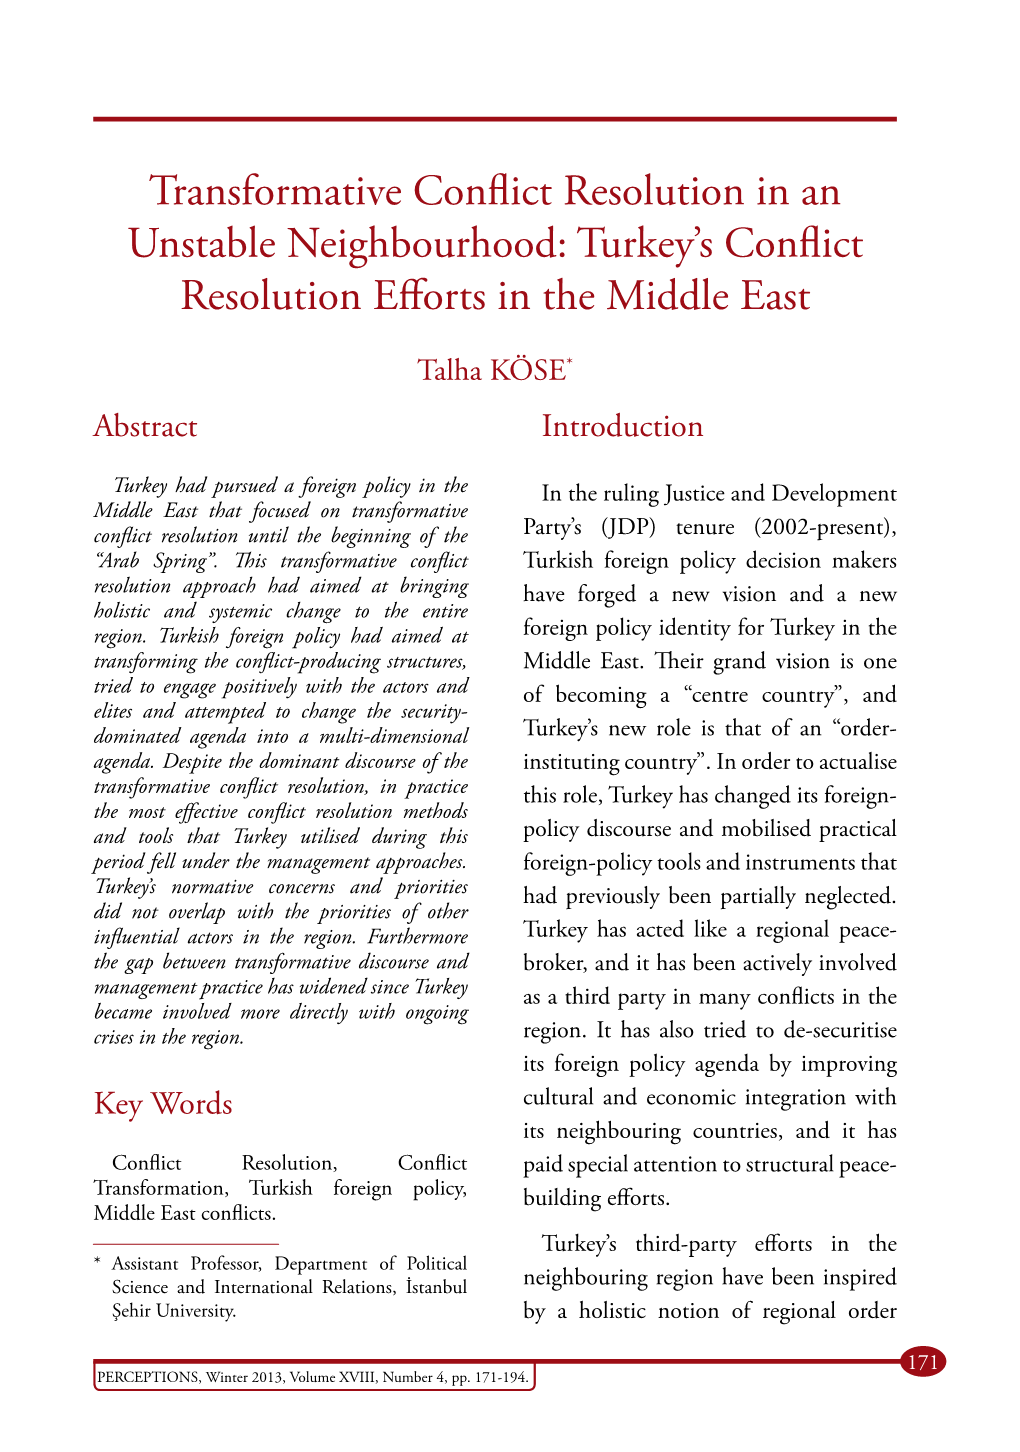 Transformative Conflict Resolution in an Unstable Neighbourhood: Turkey's Conflict Resolution Efforts in the Middle East